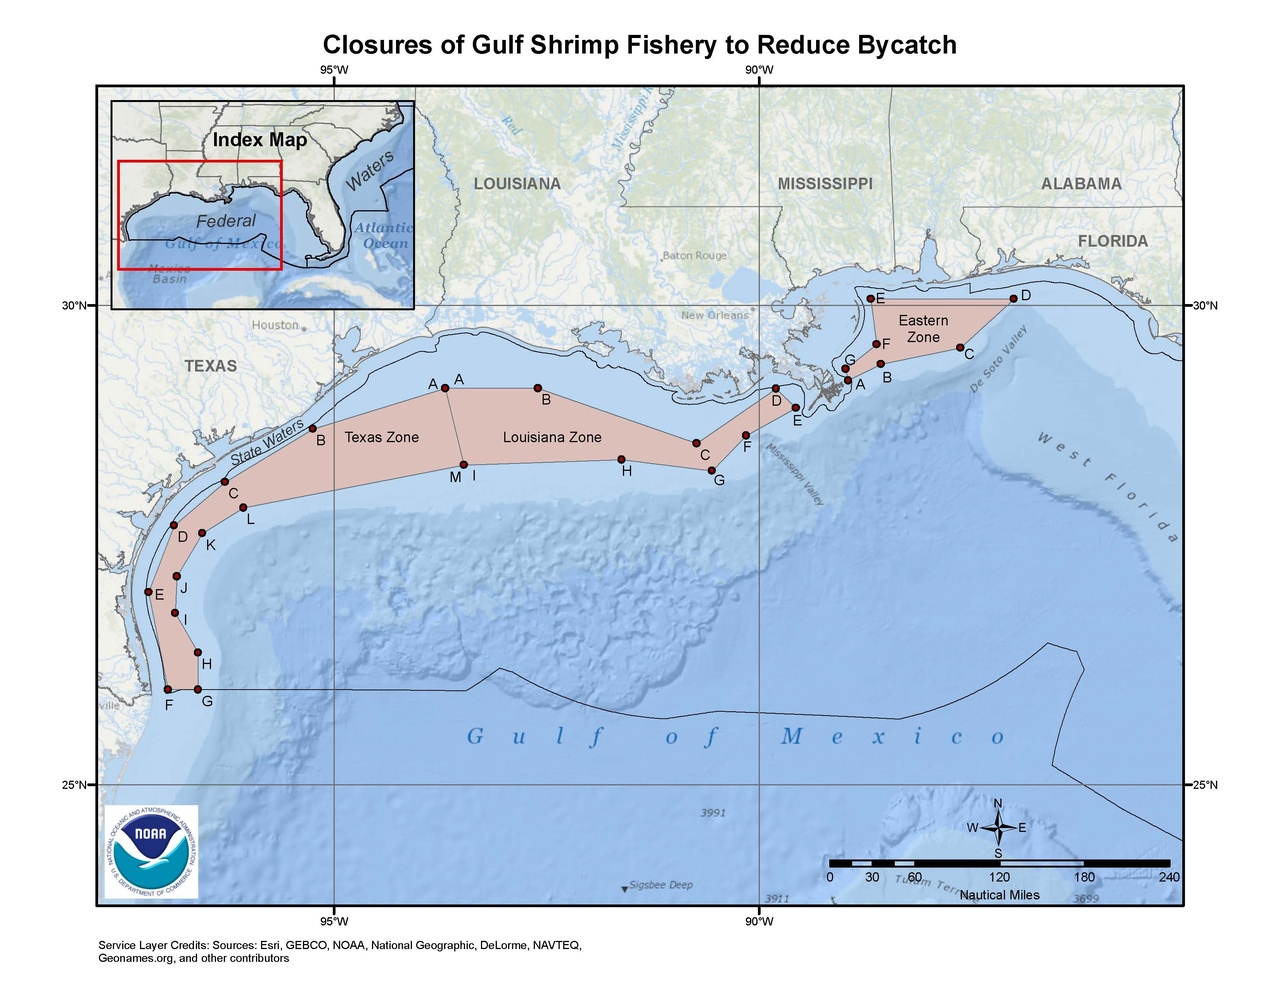 Image: Gulf Shrimp Closures to Reduce Red Snapper Bycatch Fishery Management Area Map & GIS Data